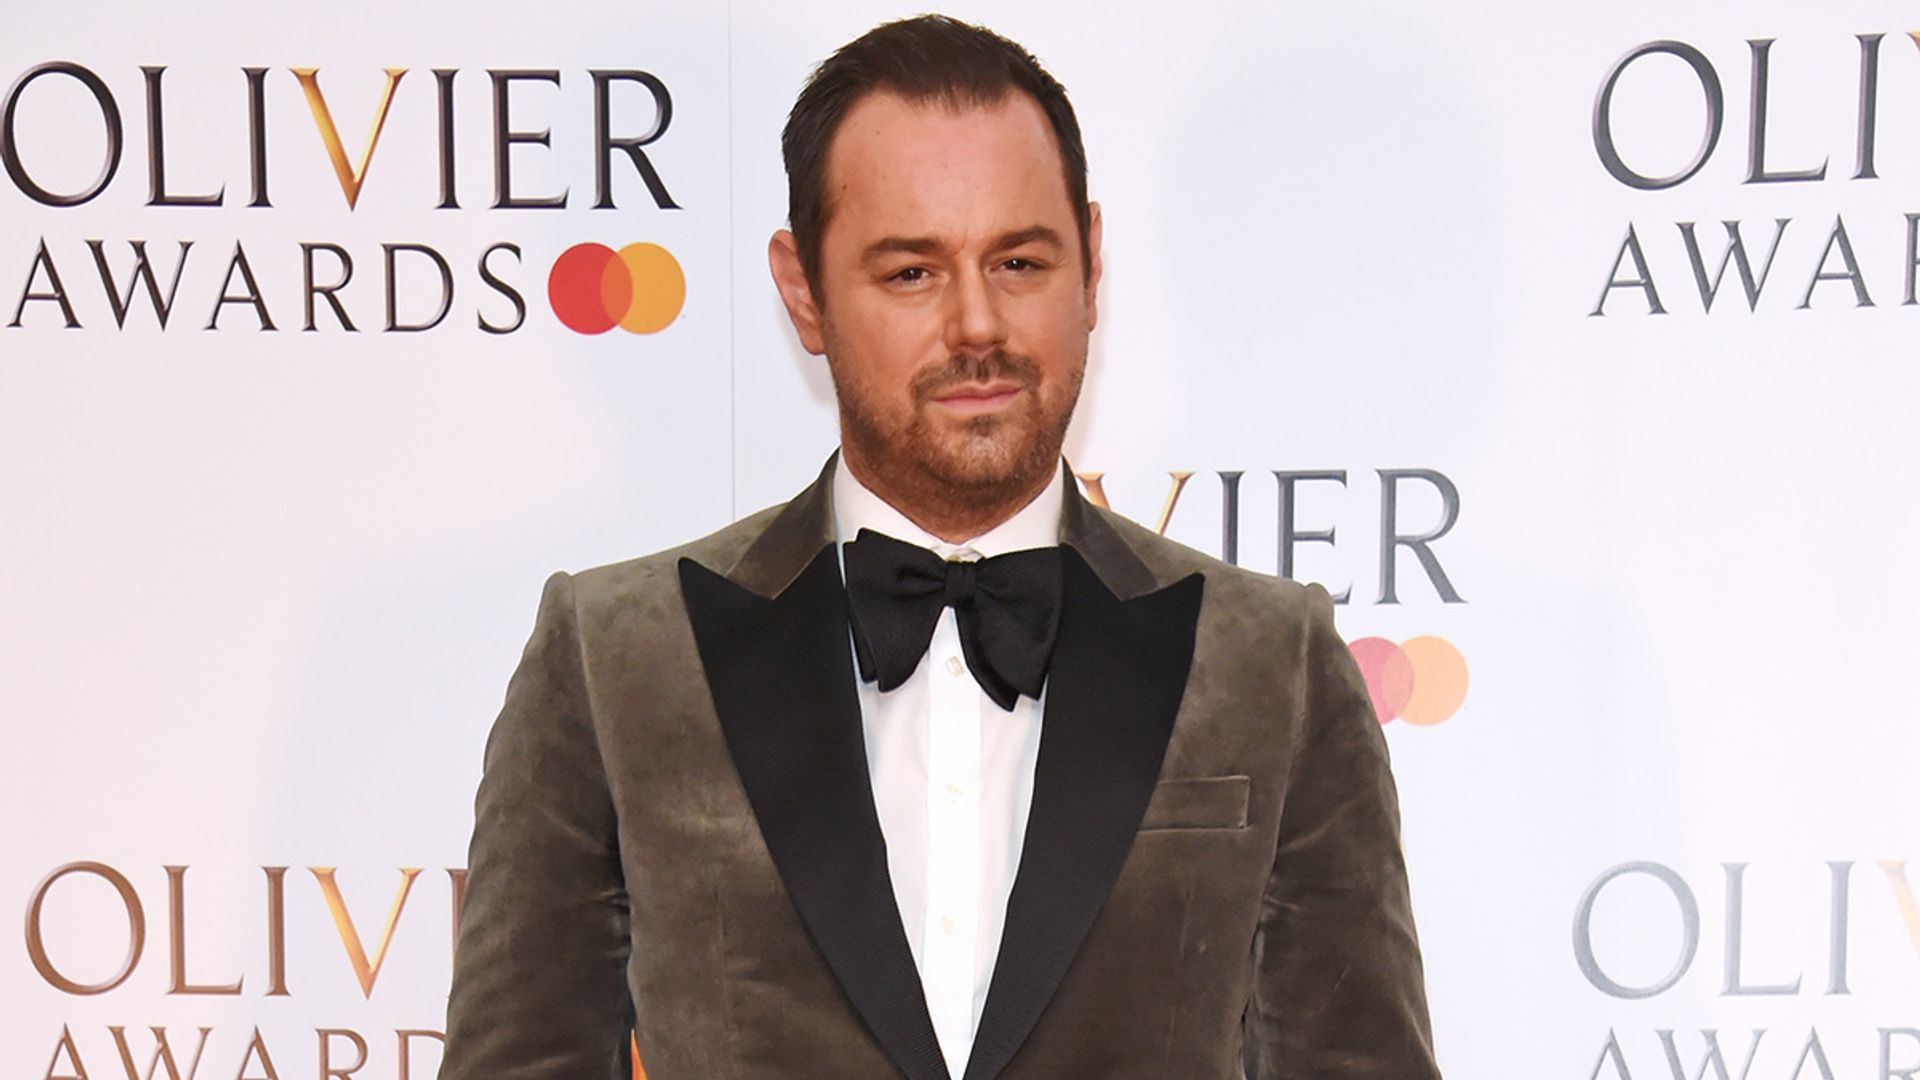 Danny Dyer flirts with the Duchess of Cornwall at the Olivier Awards